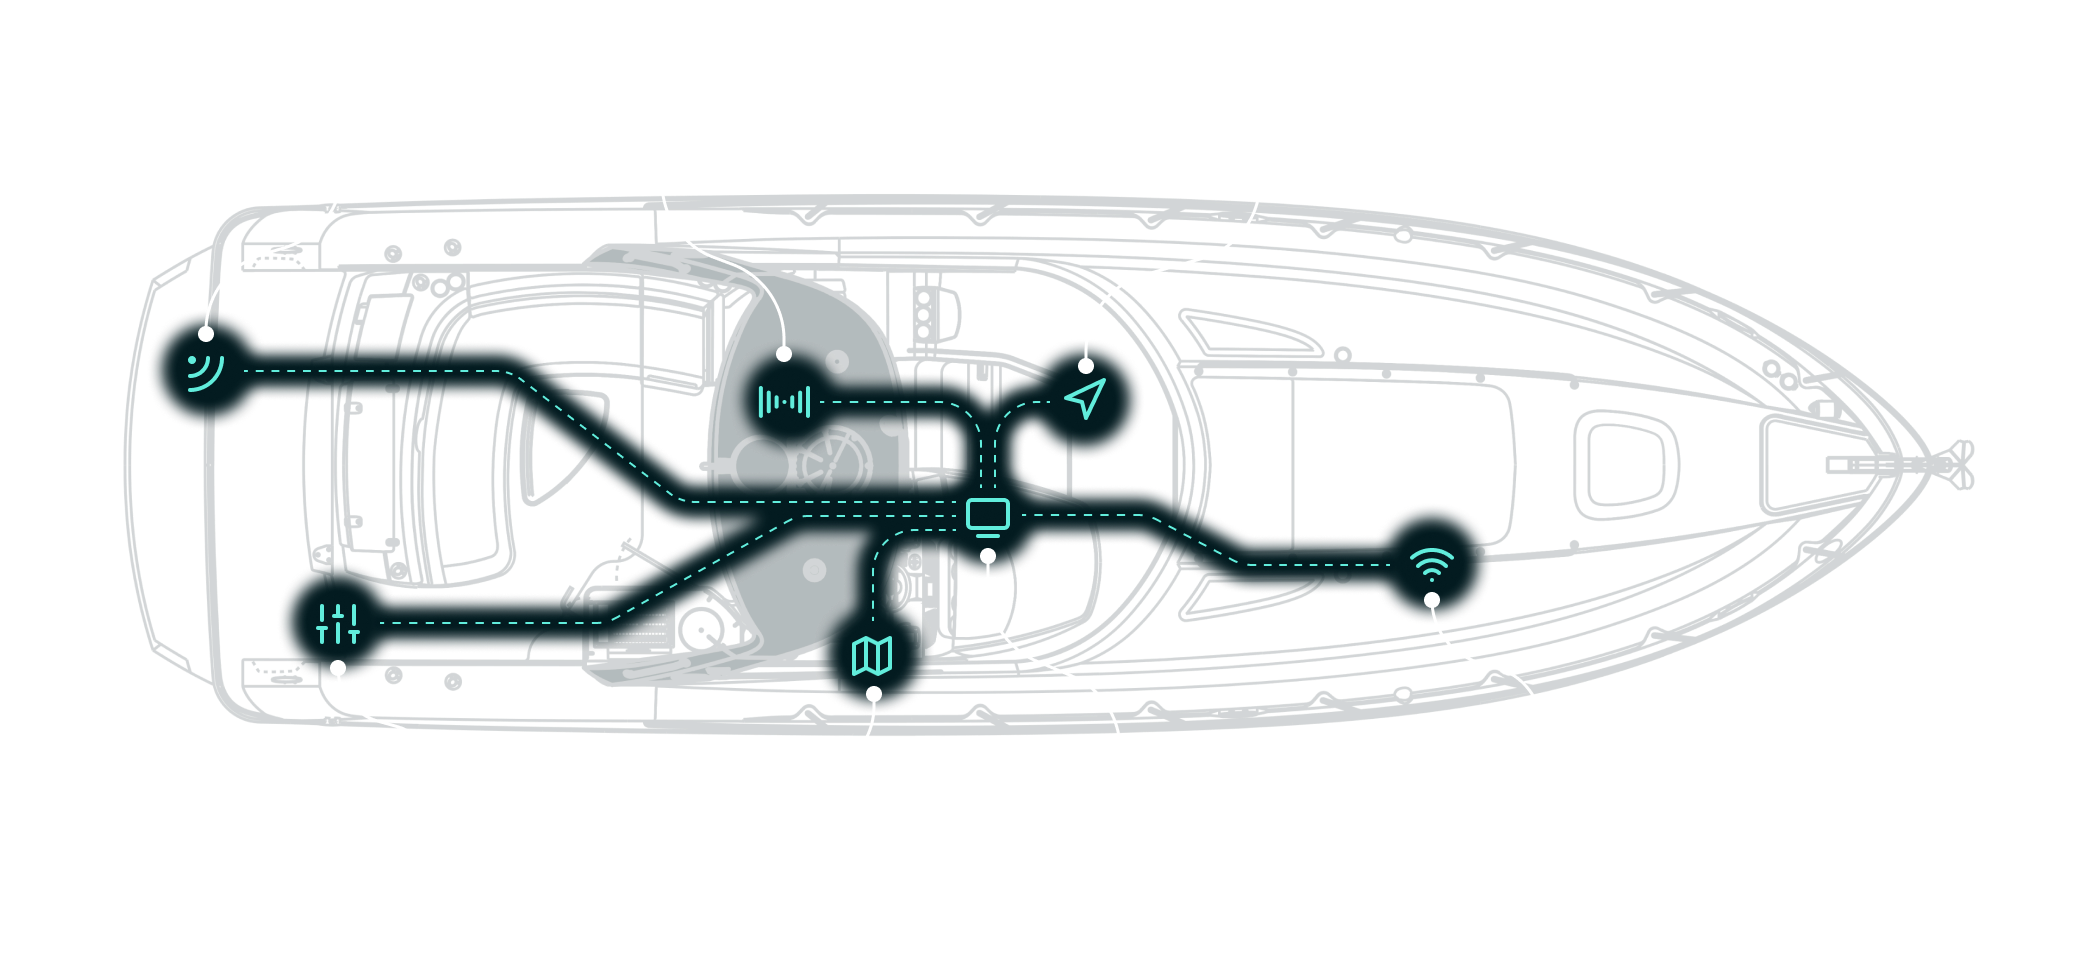 A diagram of the various types of digital systems on a boat.